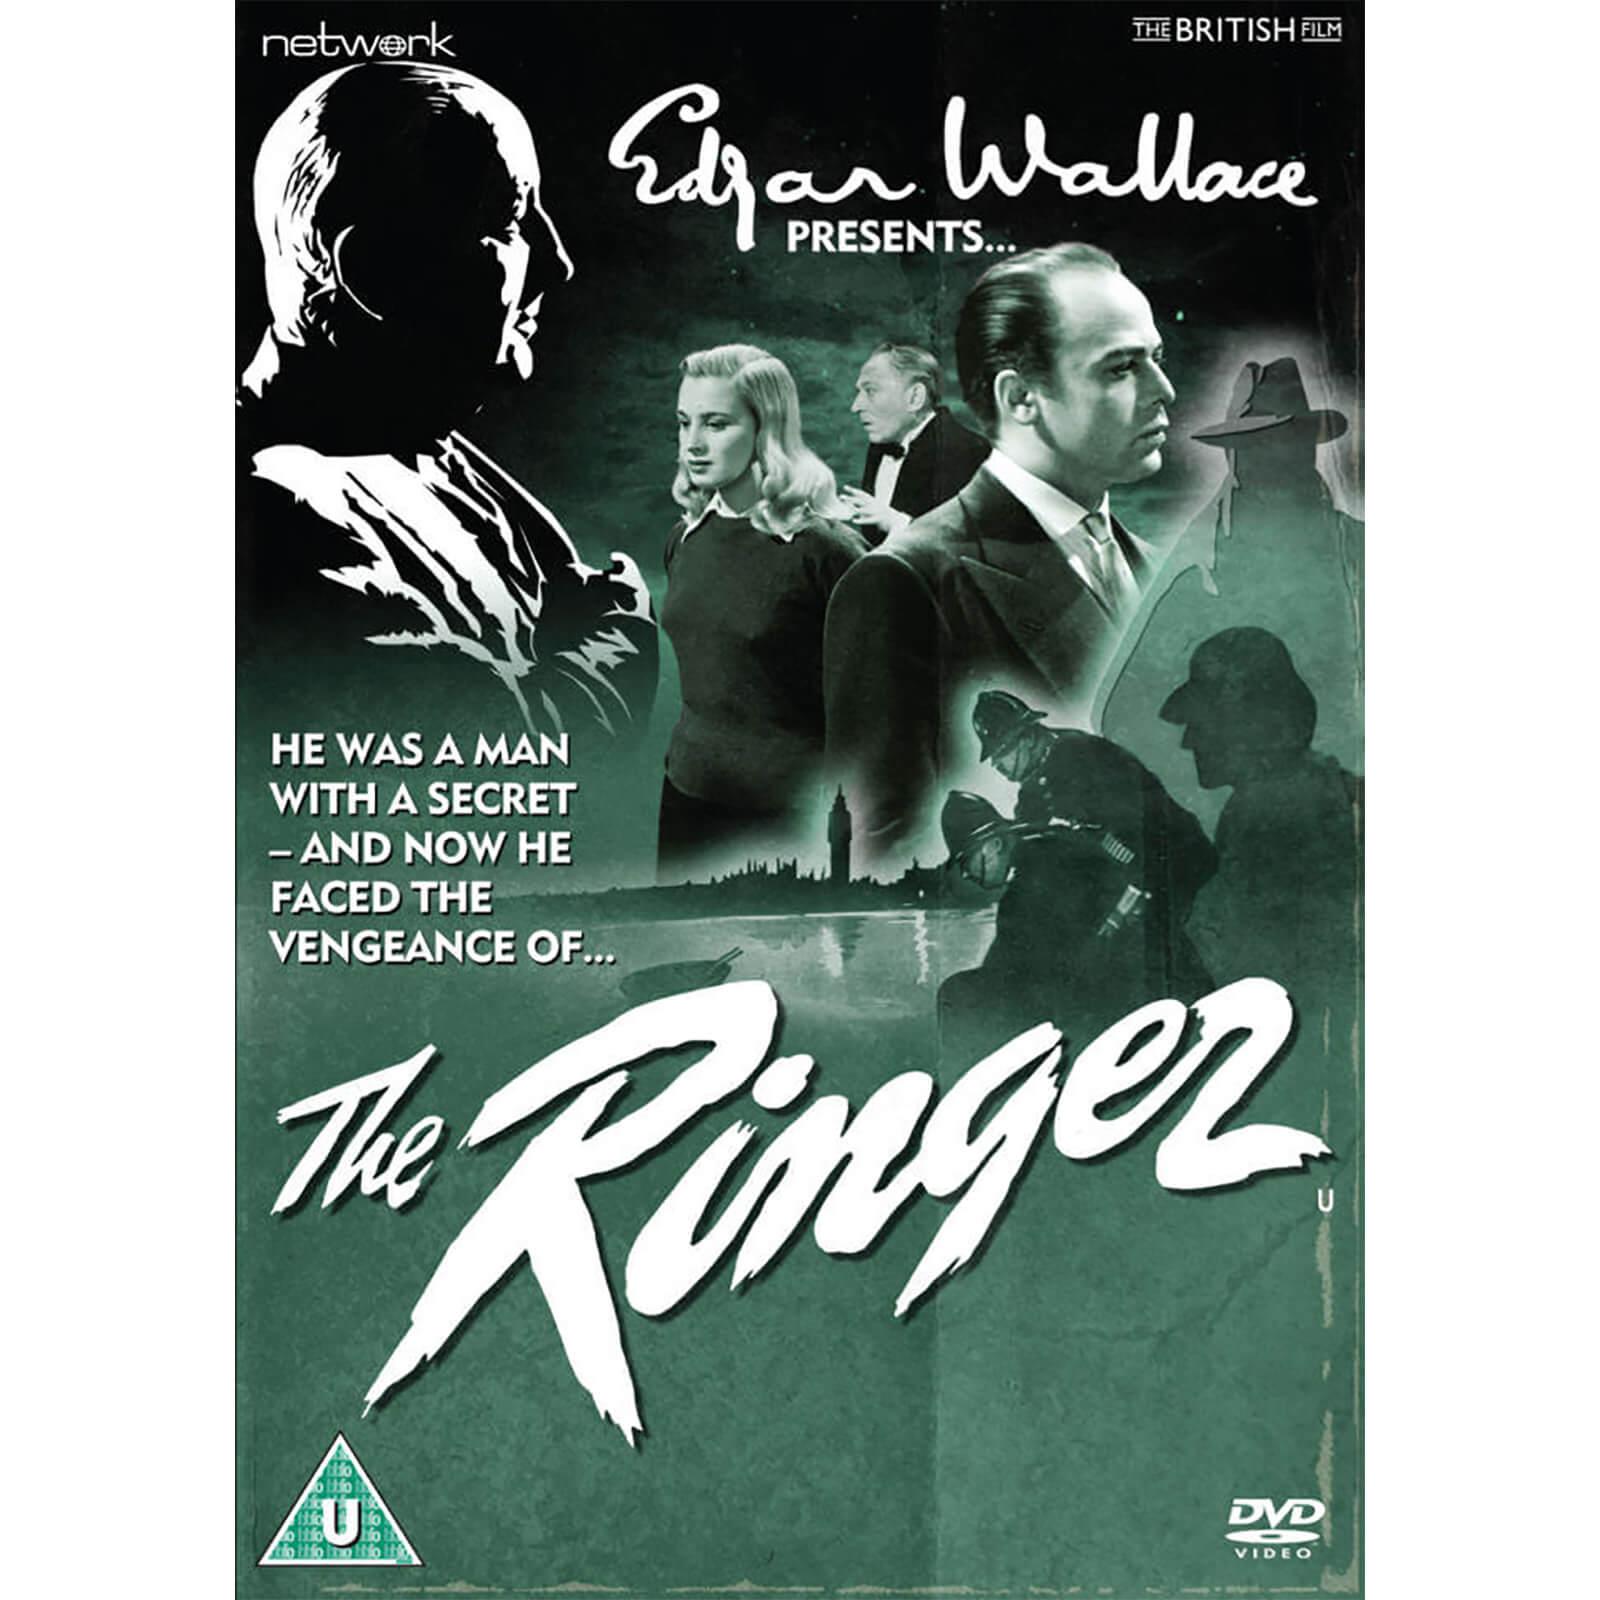 network edgar wallace presents: the ringer